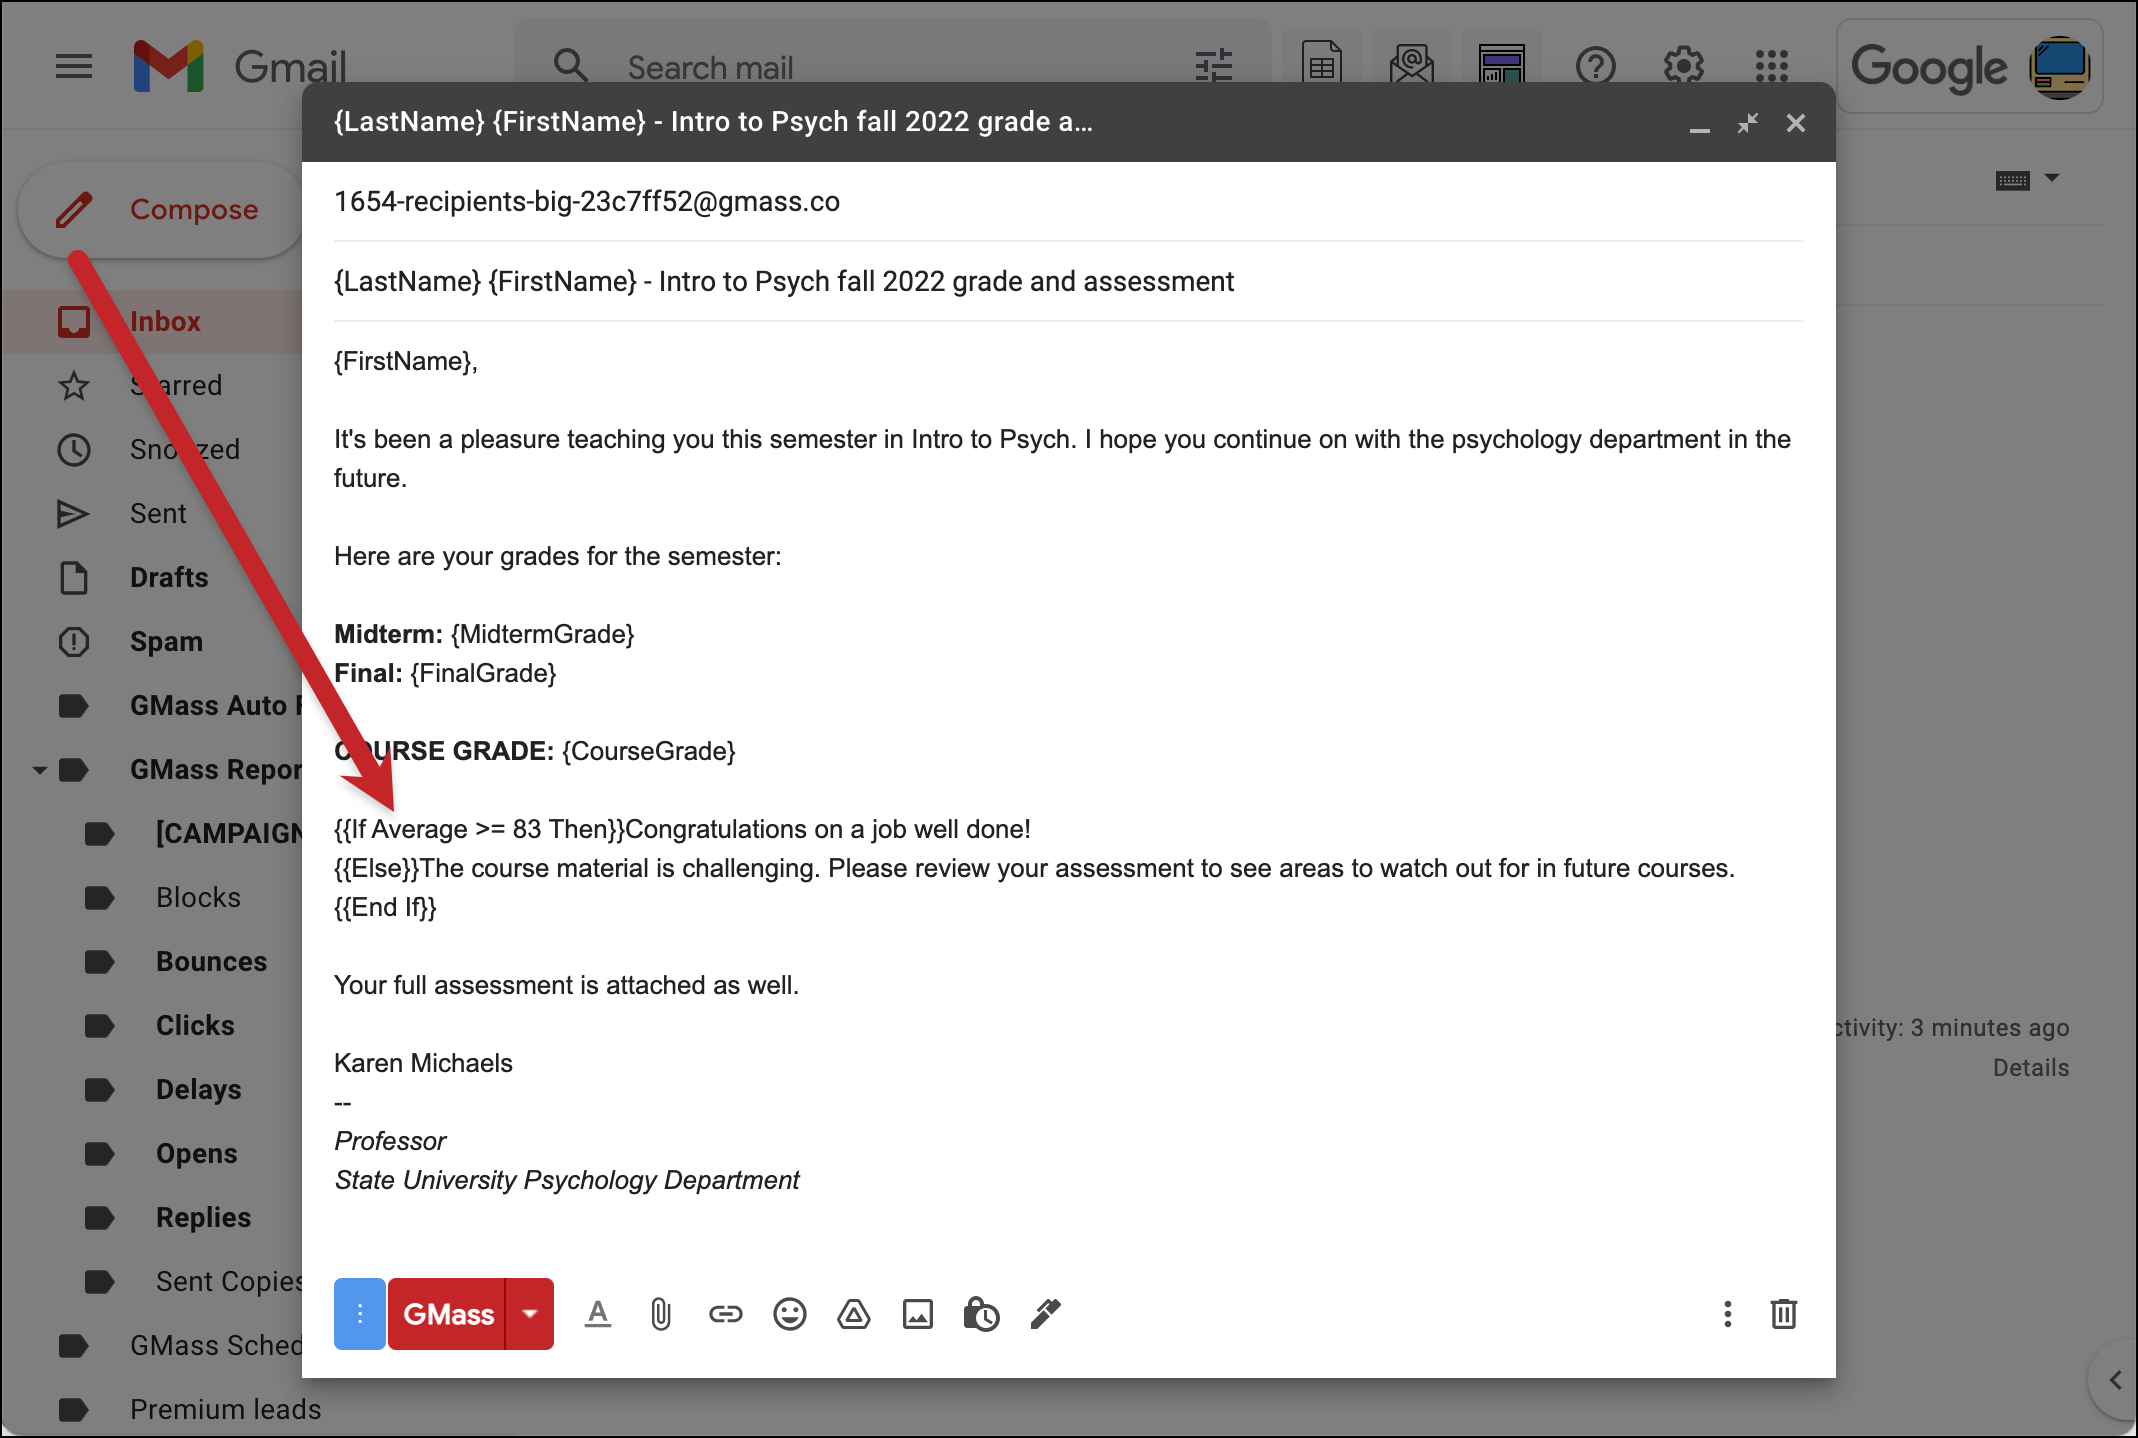 Conditional content in college department email